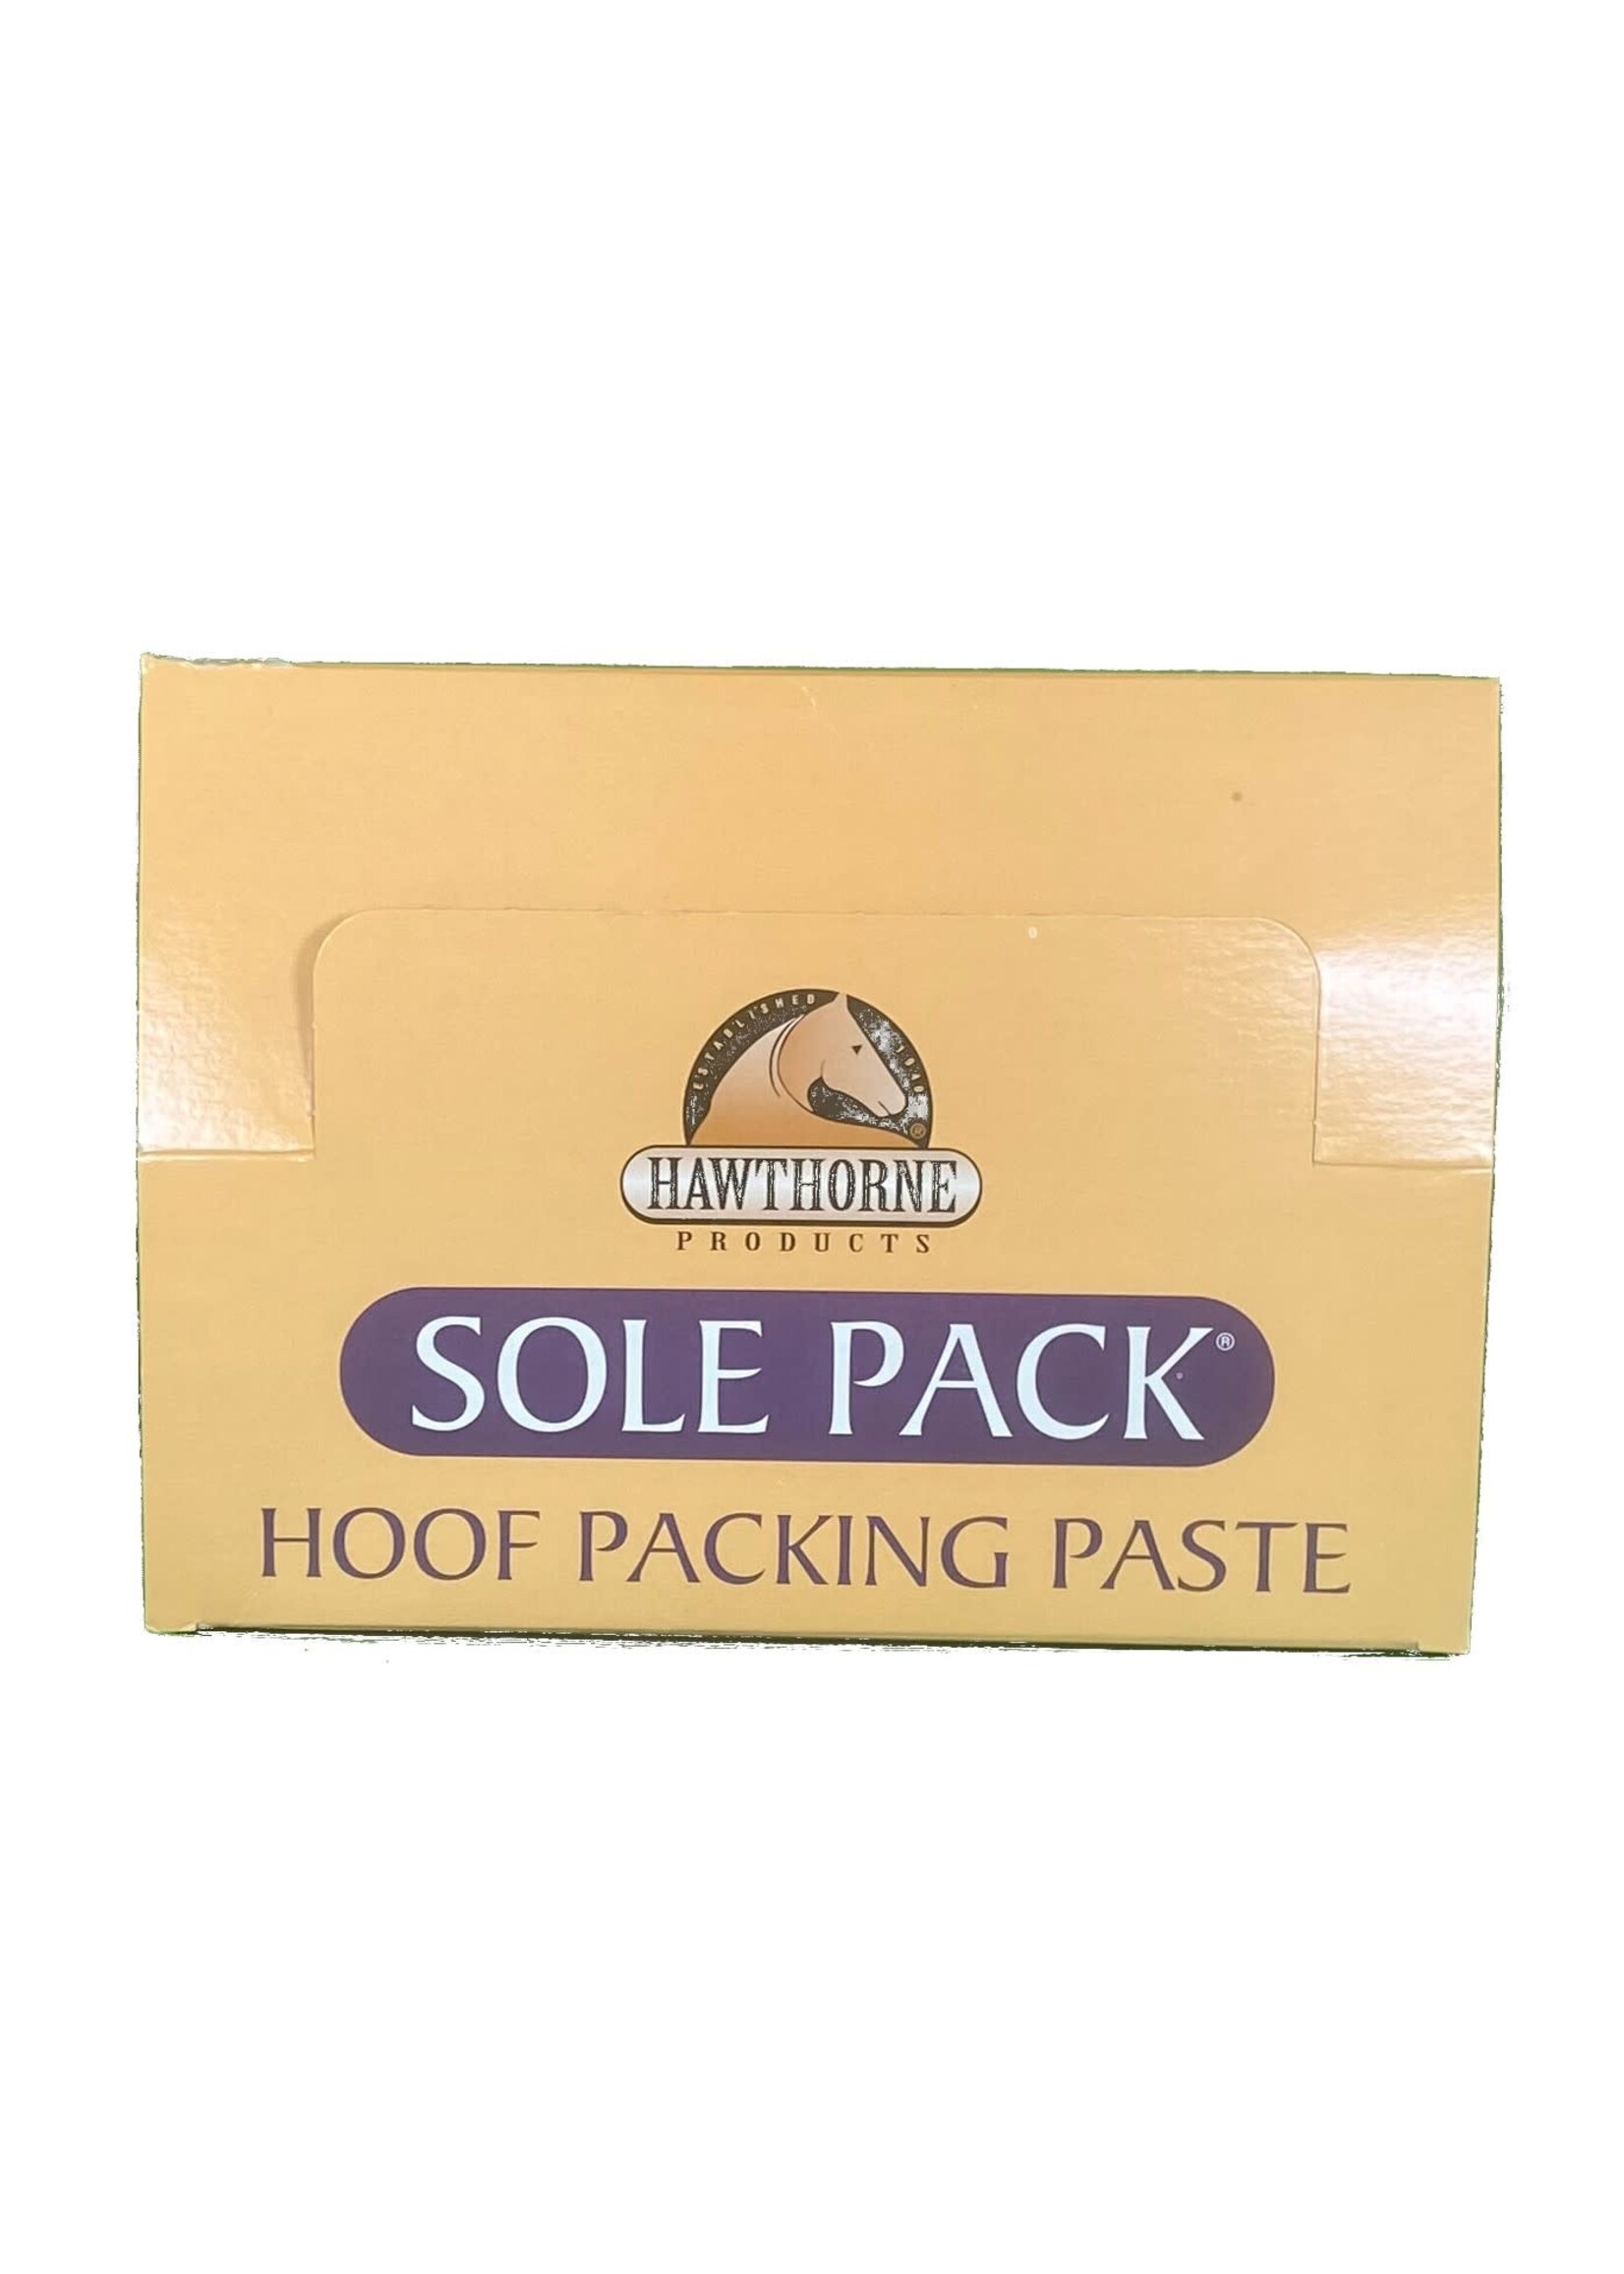 Sole Pack Sole pack, 2 oz. patties